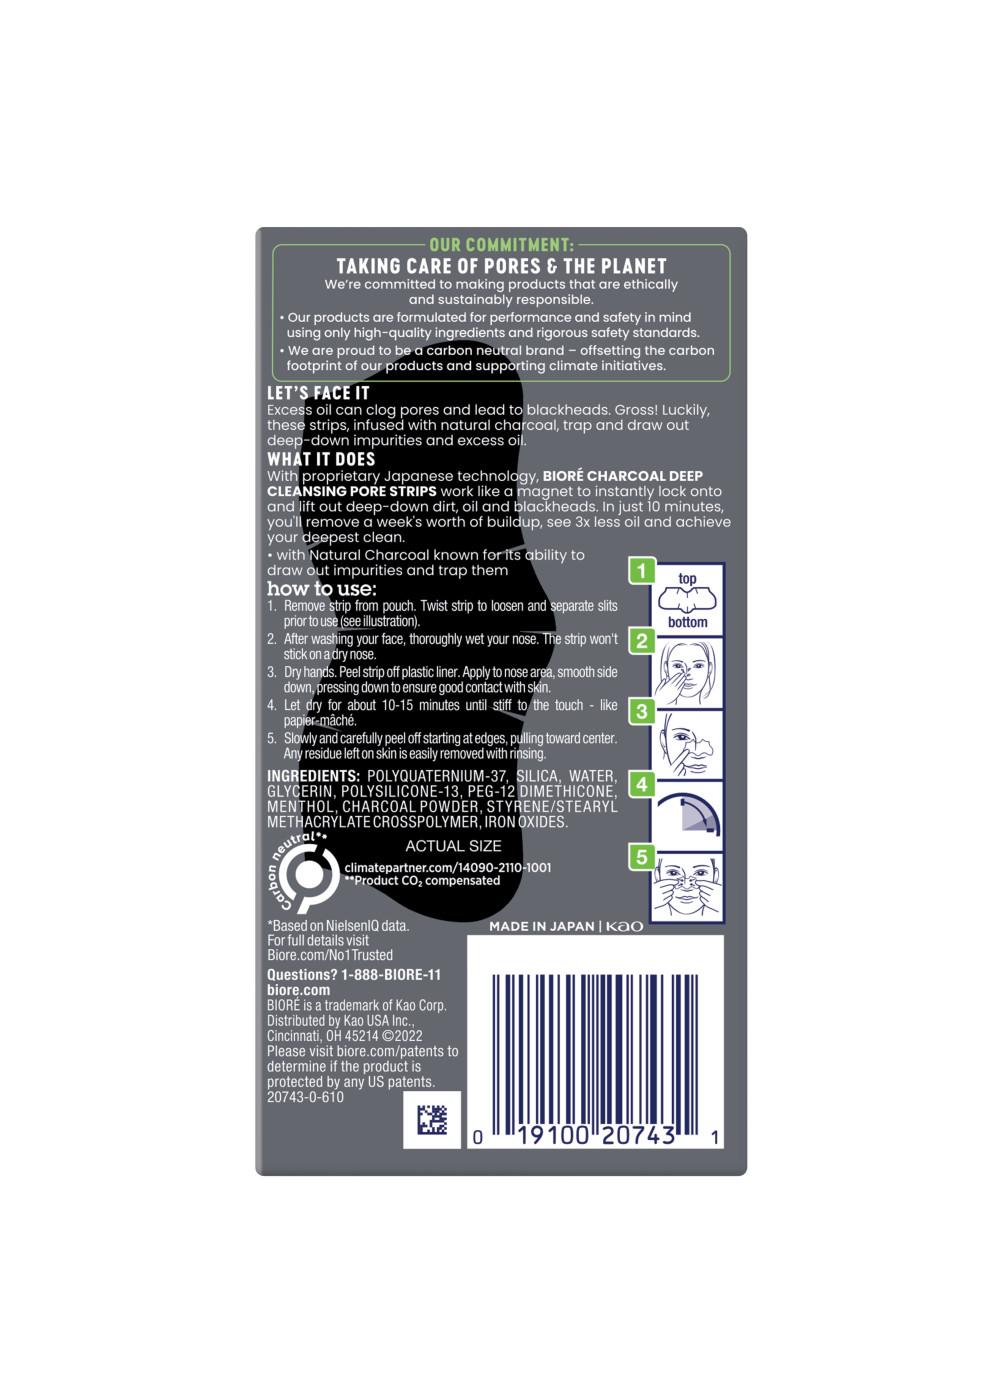 Bioré Oil Control Charcoal Deep Cleansing Pore Strips; image 7 of 11